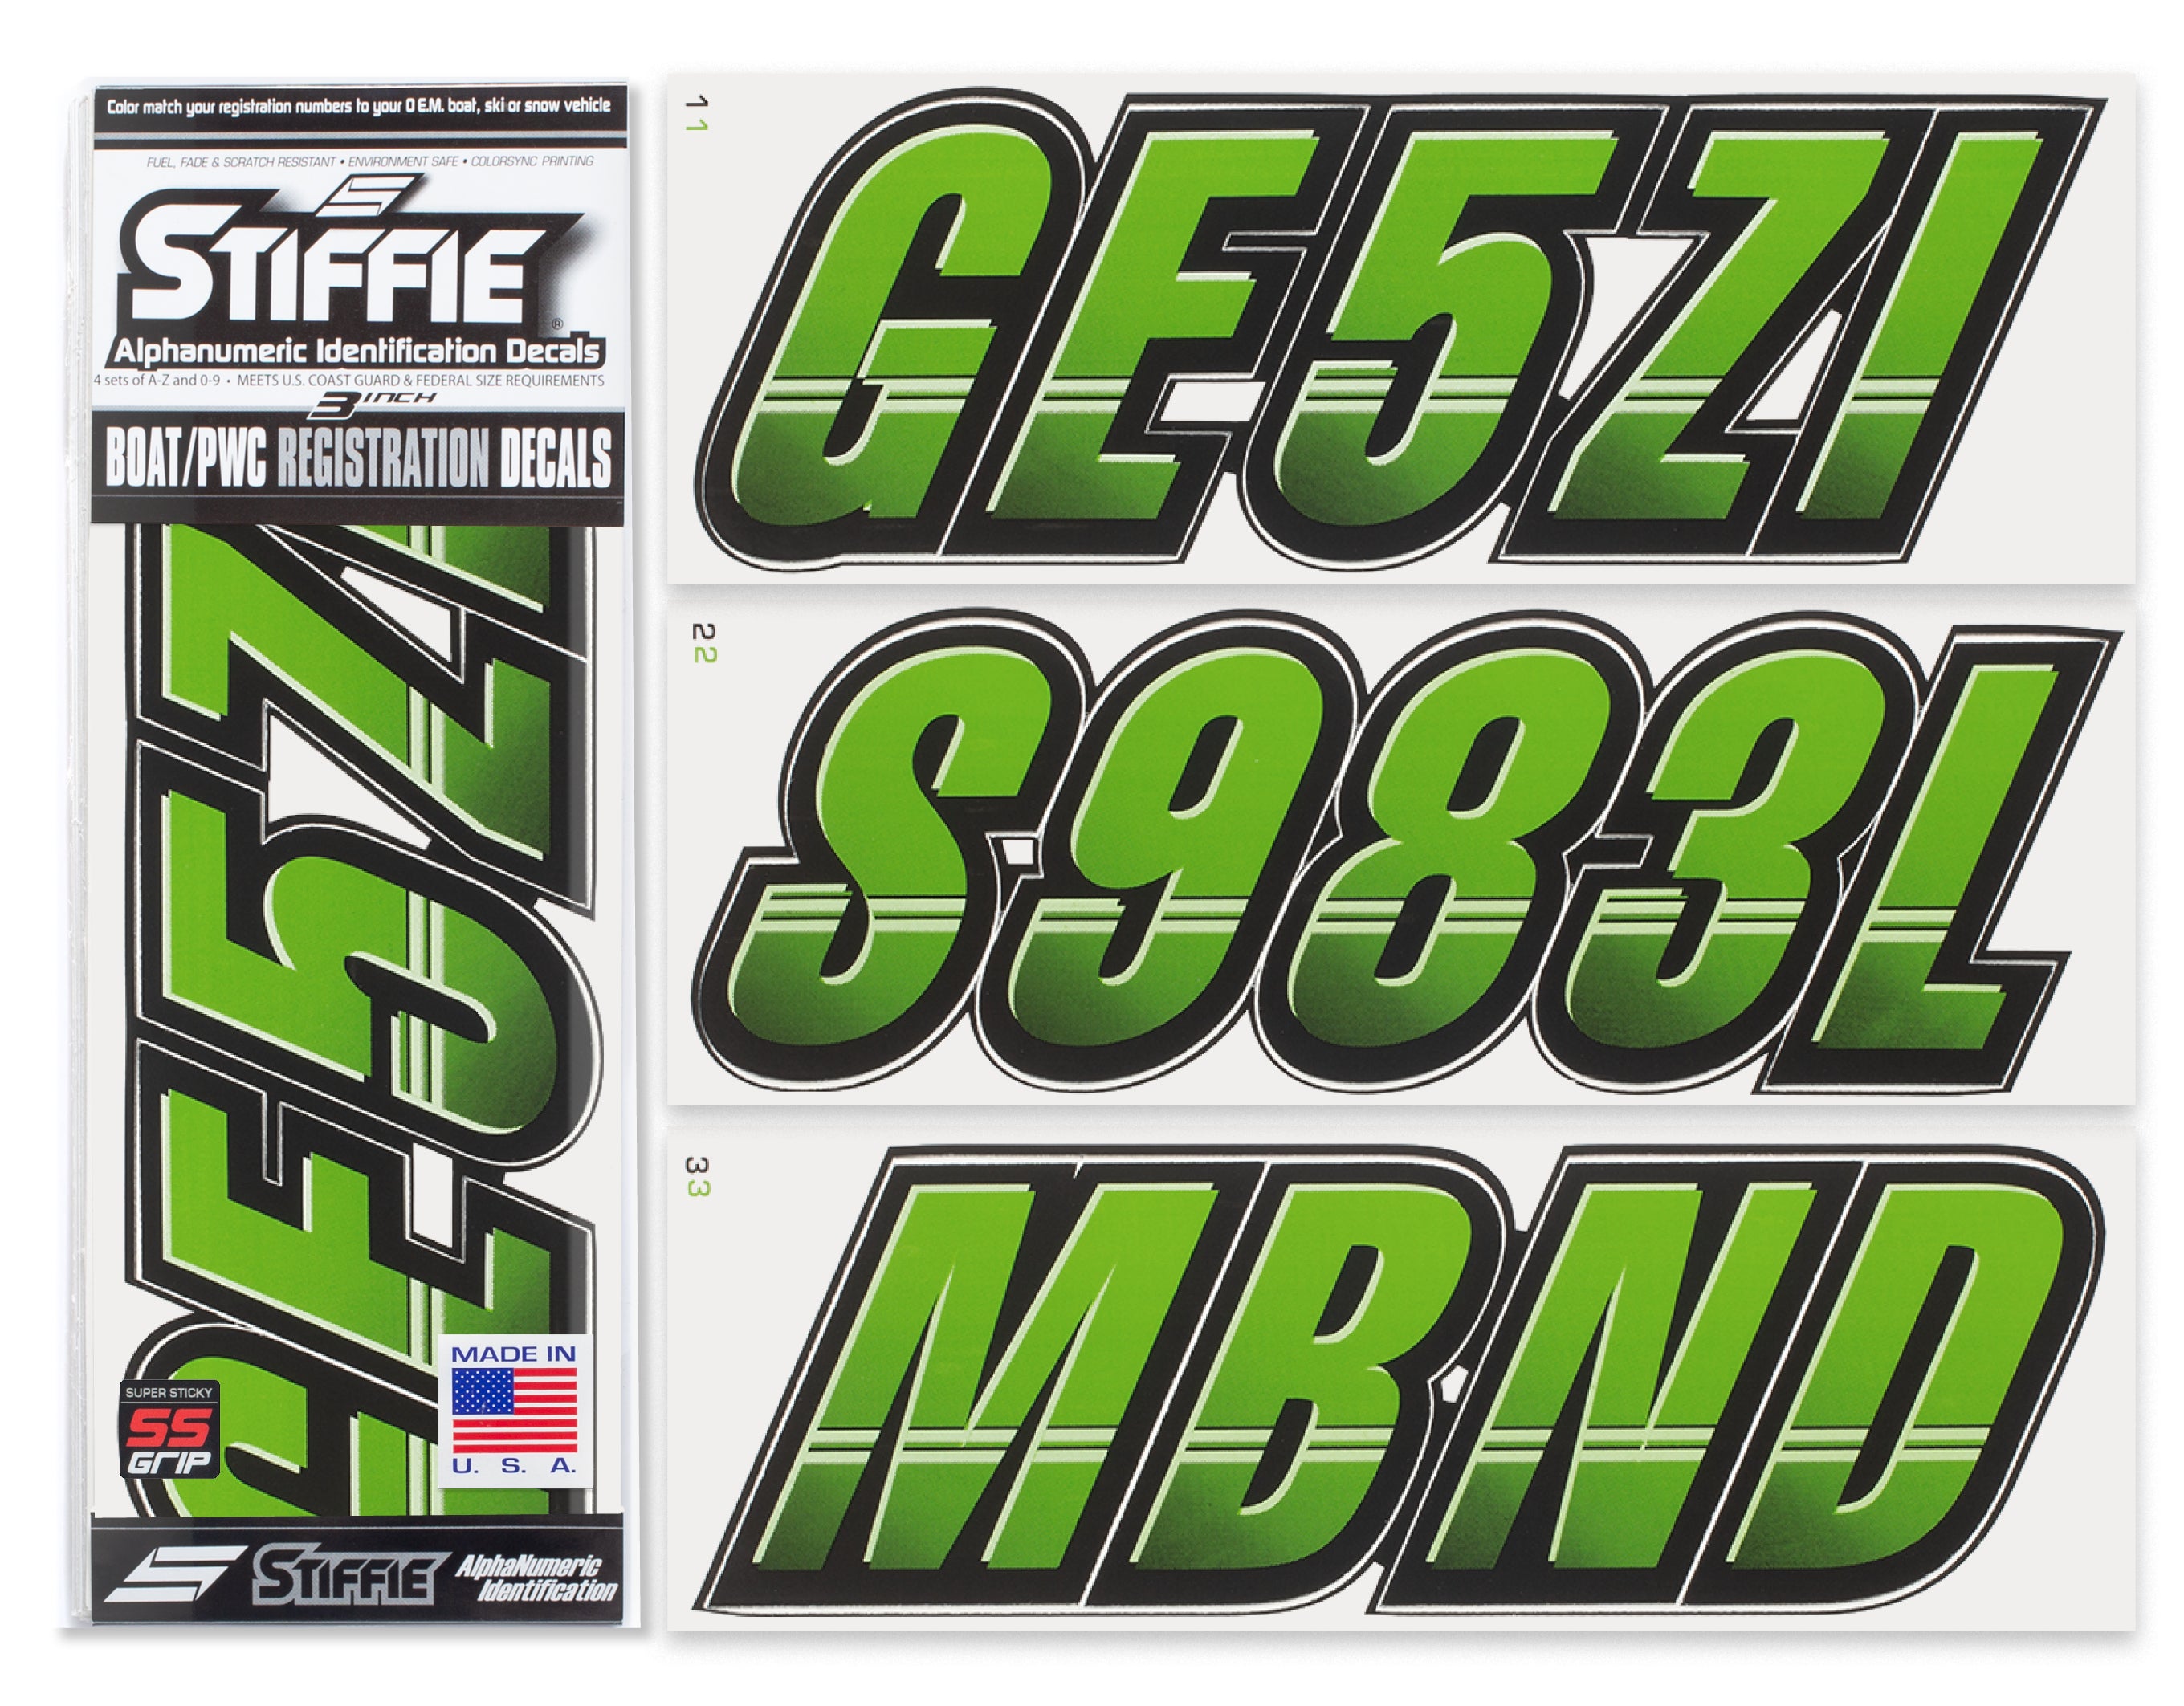 STIFFIE Techtron Team Green/Black Super Sticky 3" Alpha Numeric Registration Identification Numbers Stickers Decals for Sea-Doo Spark, Inflatable Boats, Ribs, Hypalon/PVC, PWC and Boats